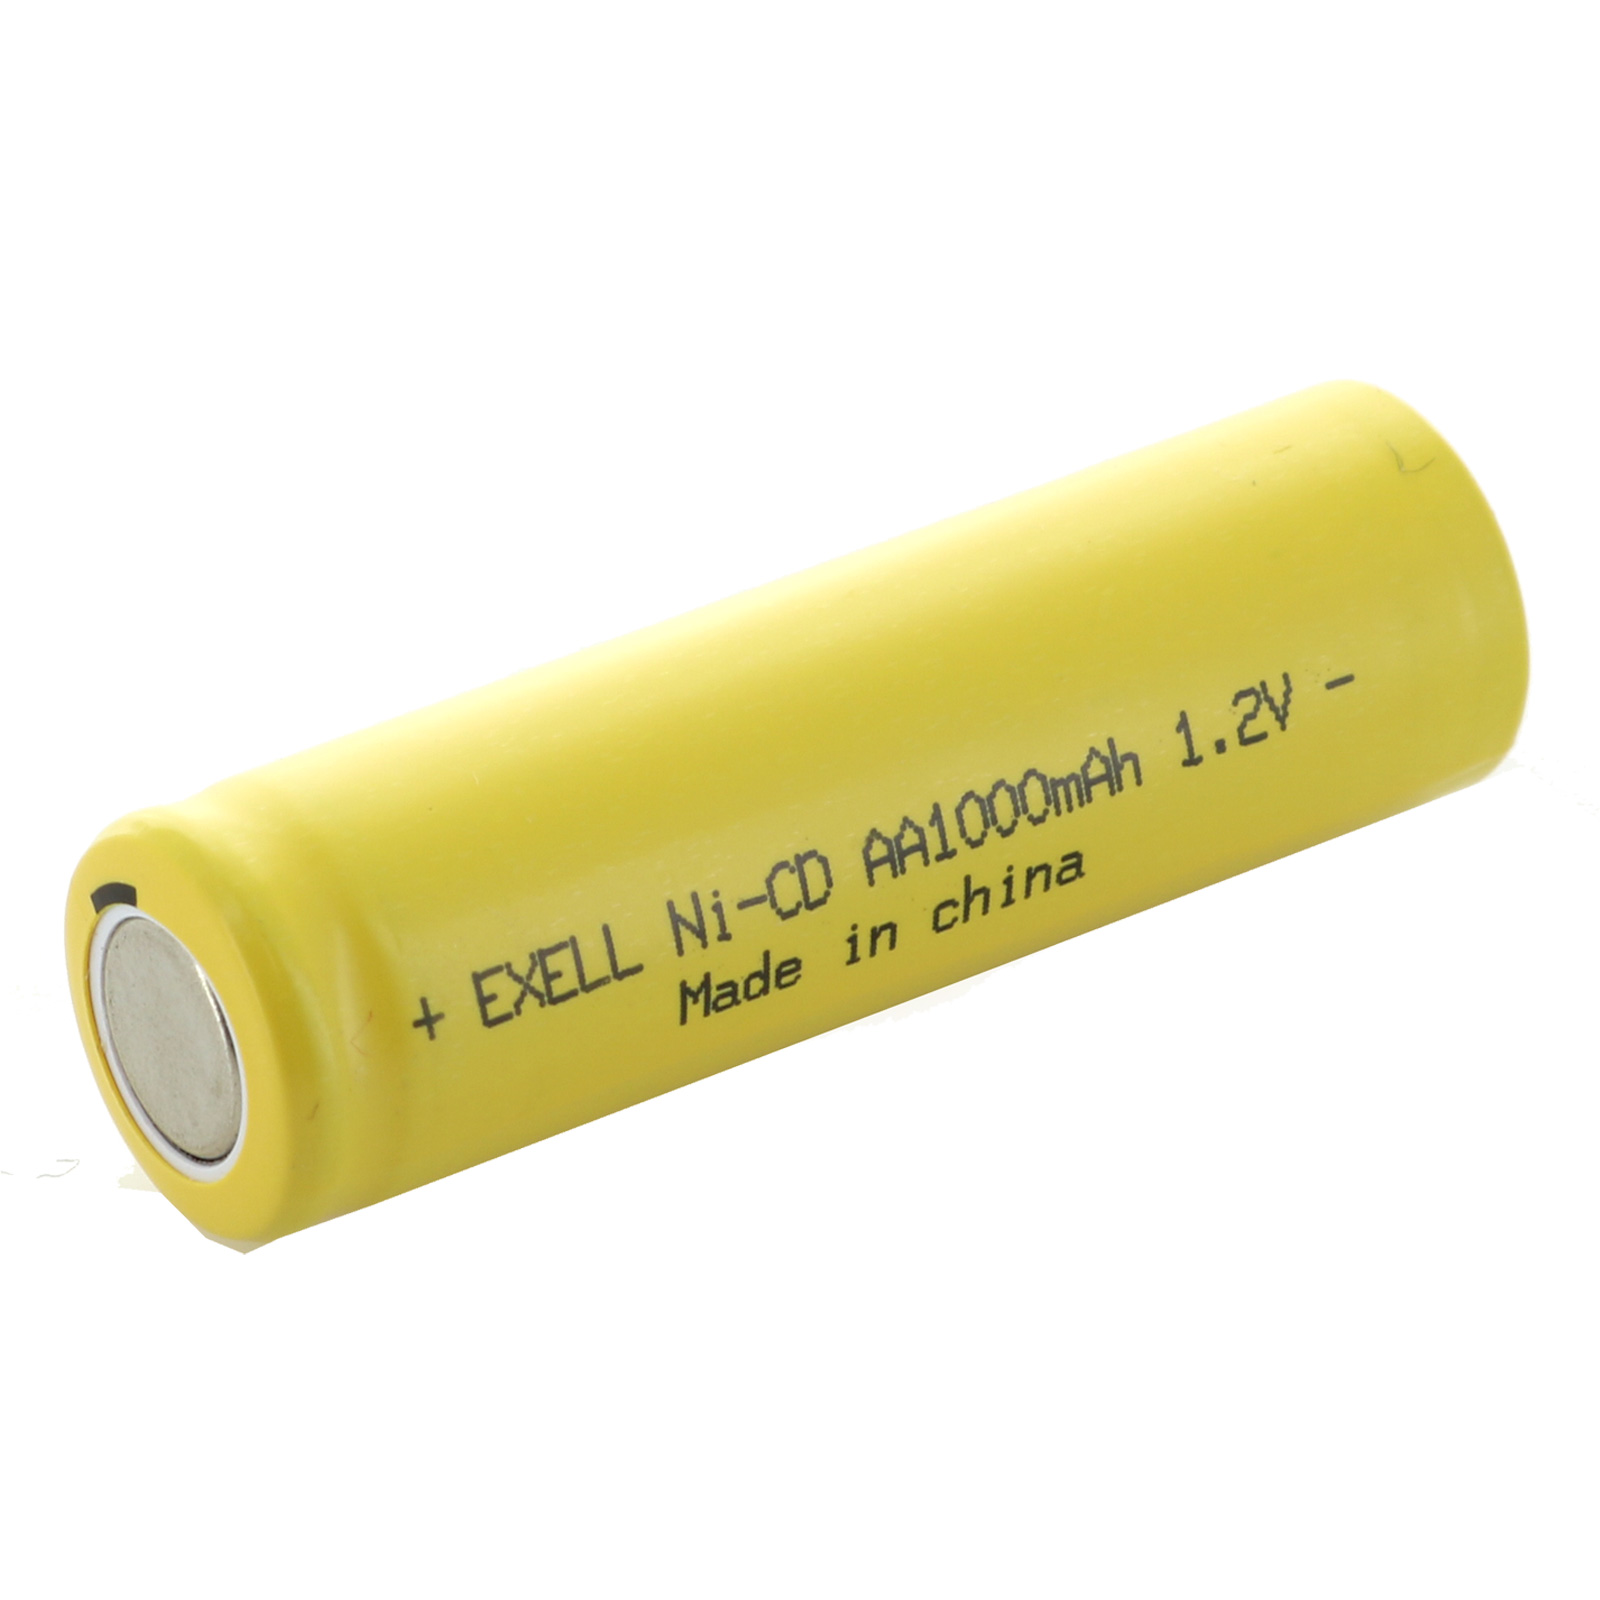 AA 1.2V 1000mAh Flat Top Rechargeable Battery for DIY, Radios, Power Packs - image 1 of 7